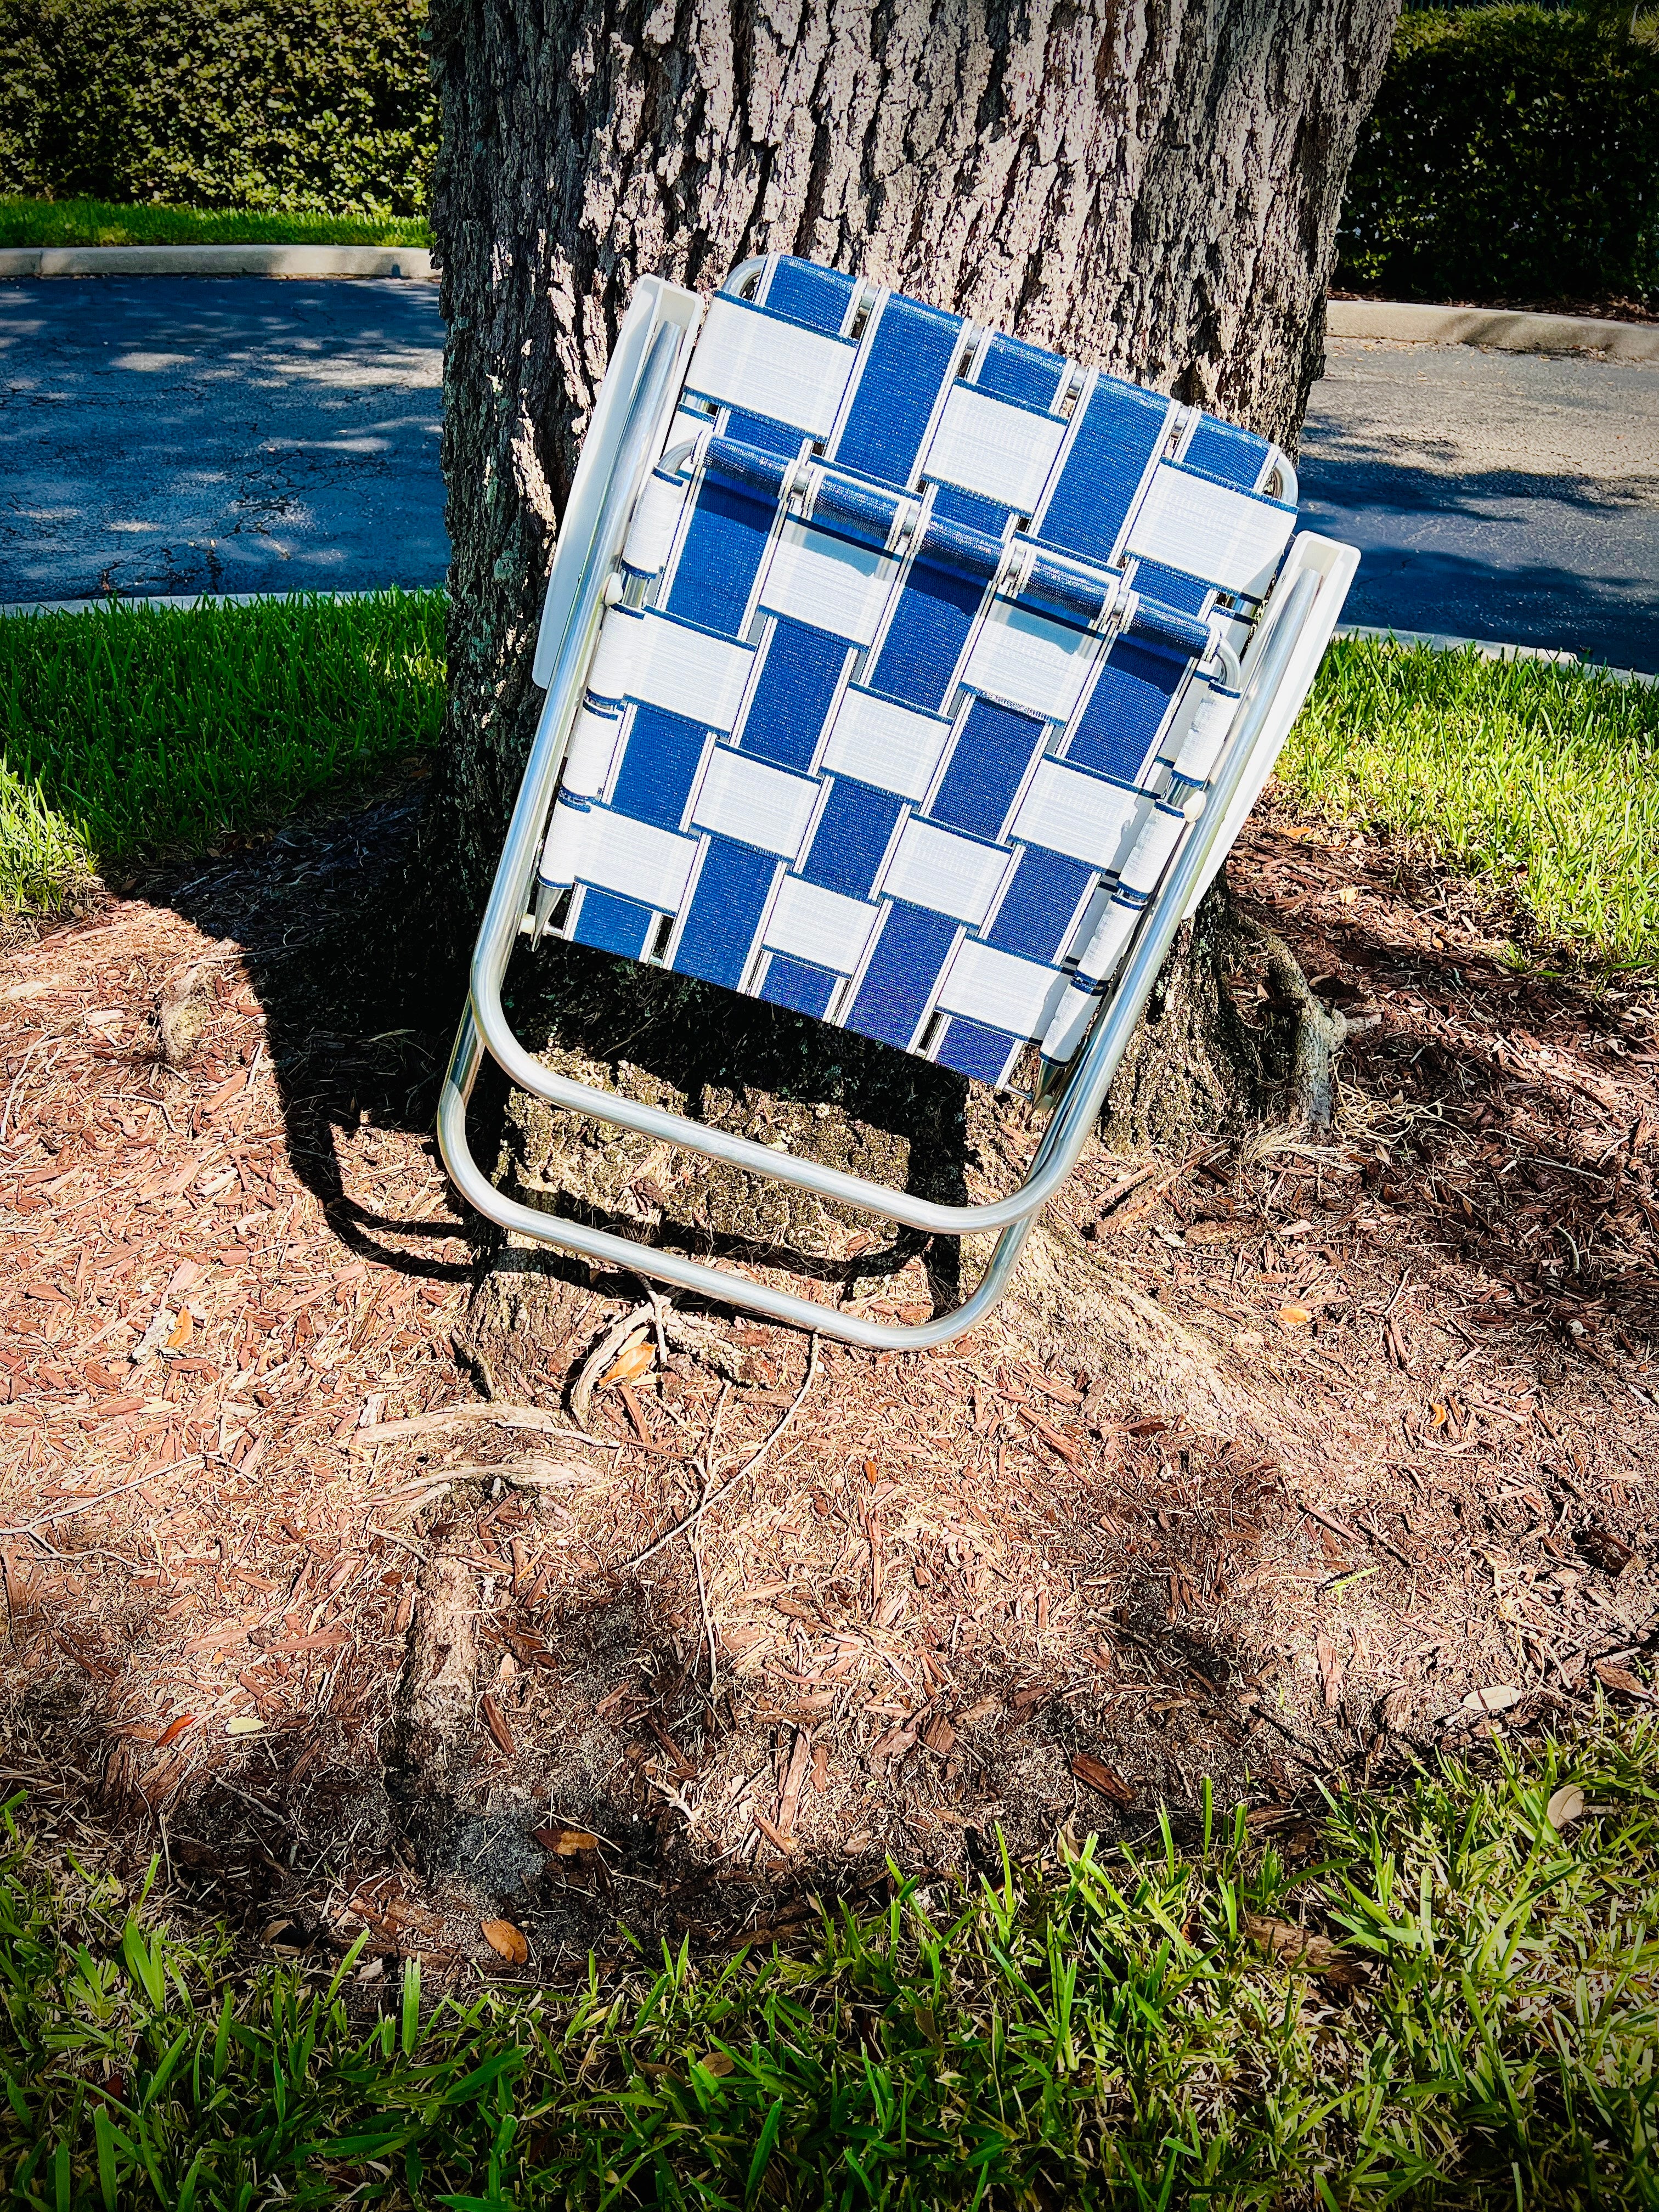 St. Augustine Classic Chair Lawn Chair USA Aluminum Webbing Chair Sitting Outside Folded up by oak tree